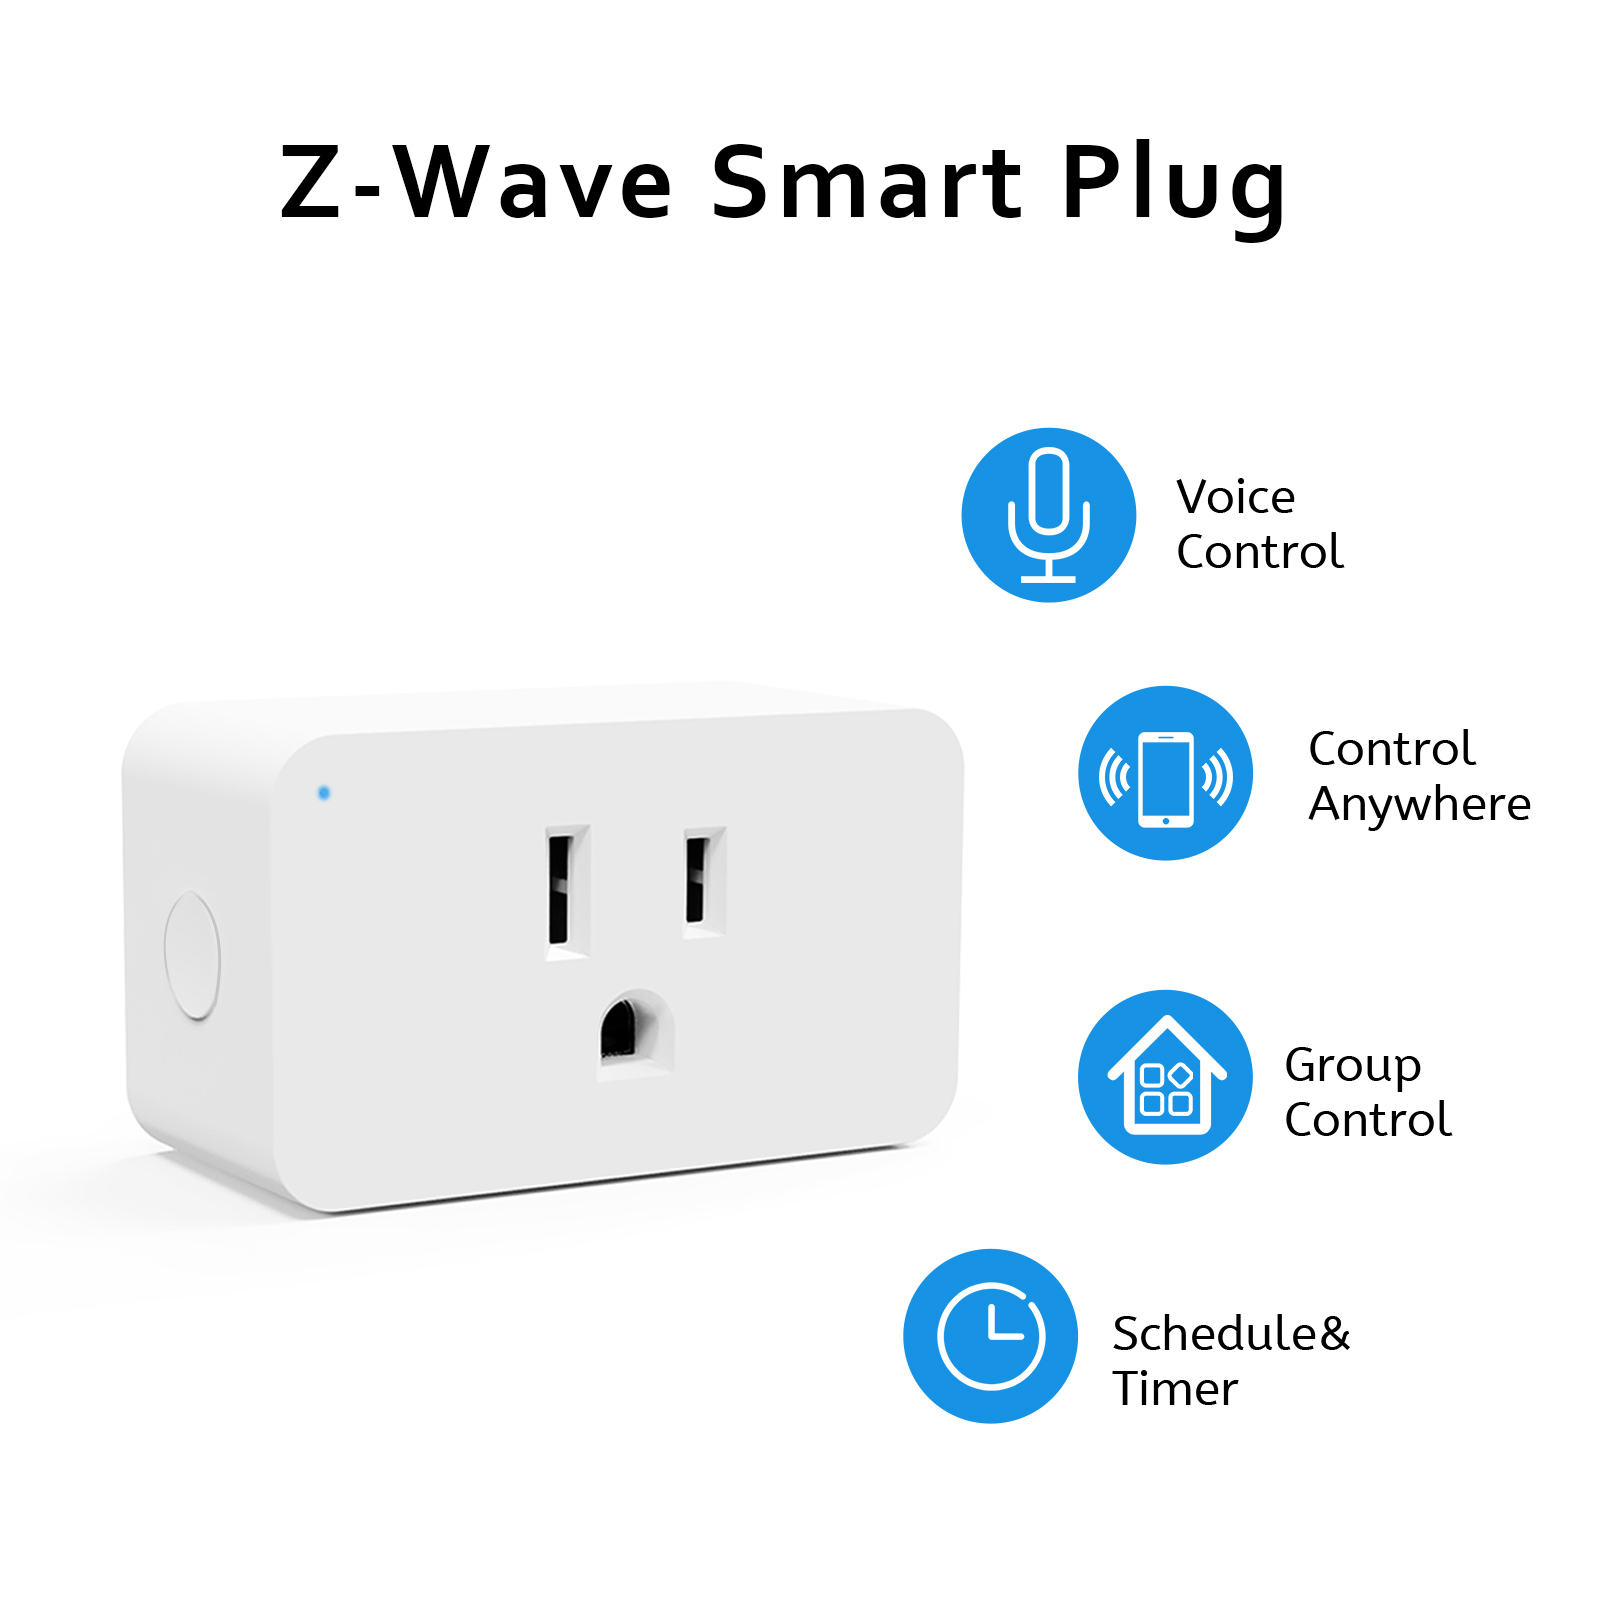 New One Z-Wave Plug, 700 Series Smart Dimmer Plug,Z-Wave Hub Required, 125V  60Hz Dimmable Smart Plug, Compatible with Alexa, Smartthings, Wink, Max